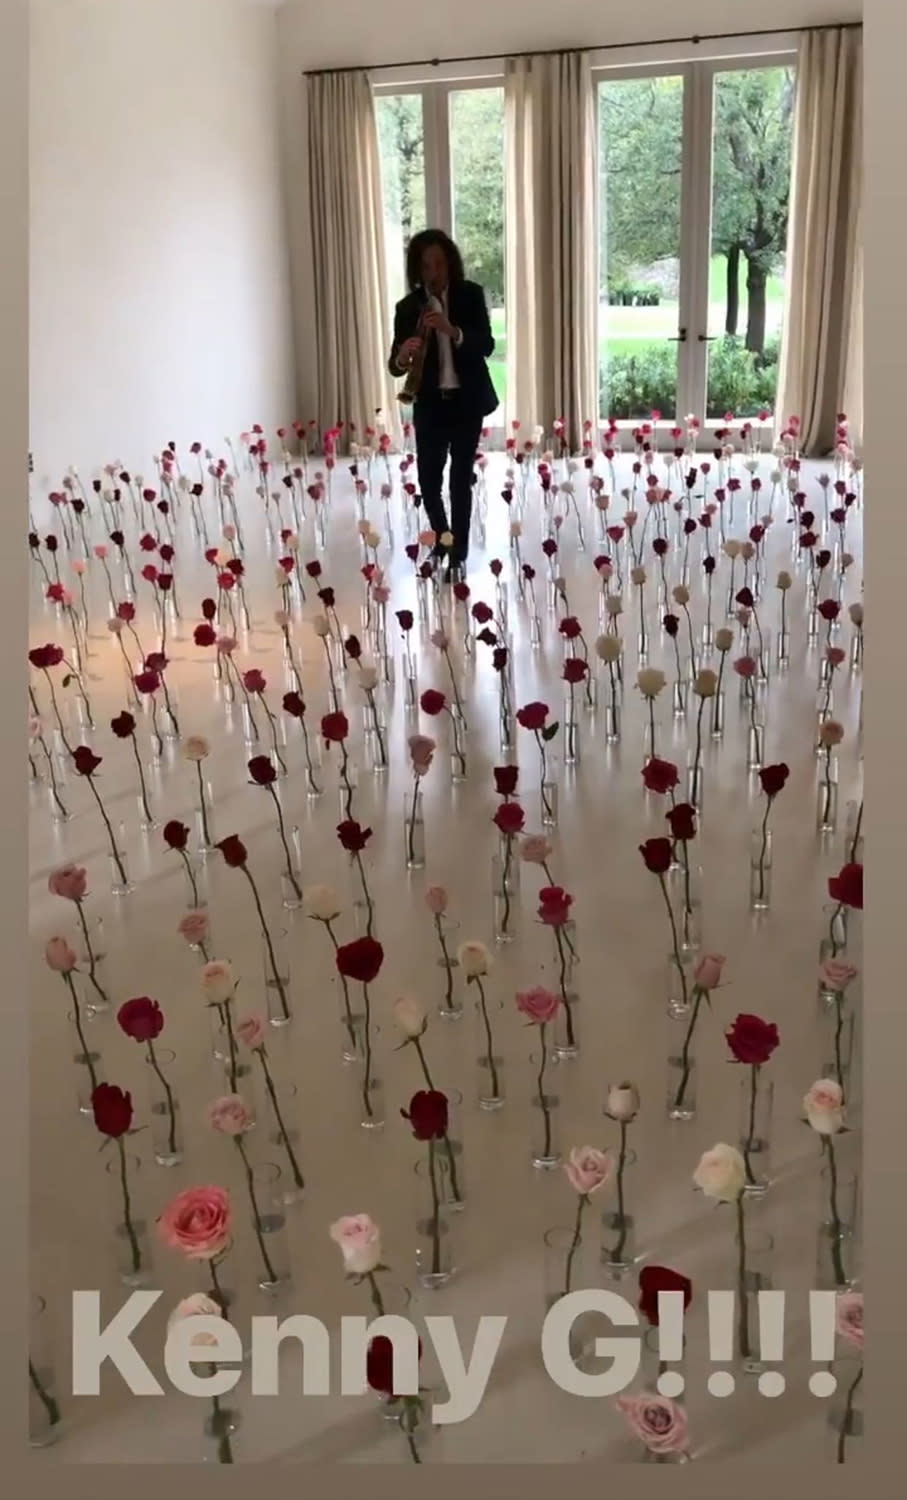 Roses That Come with Kenny G